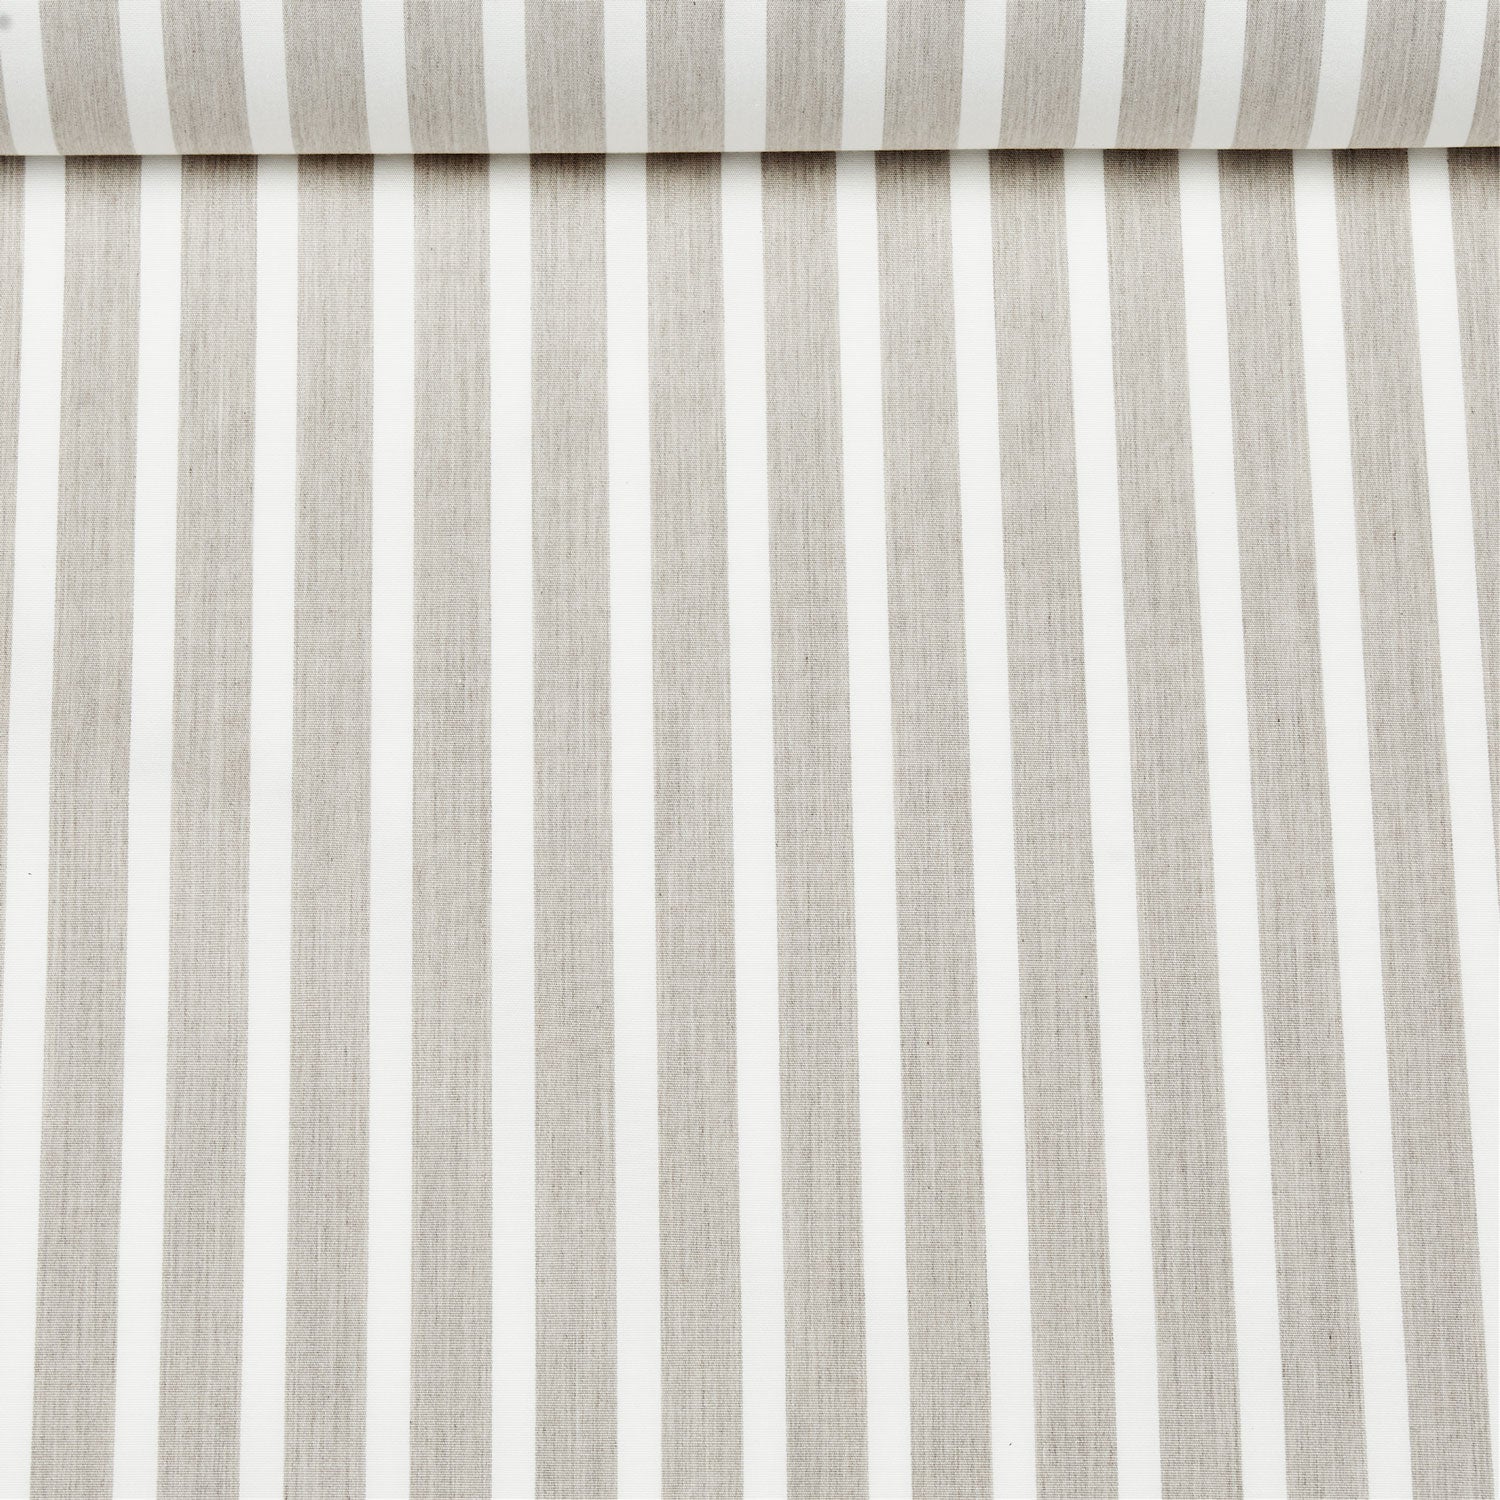 A beige and white striped solution dyed acrylic fabric used for luxury pool floats.